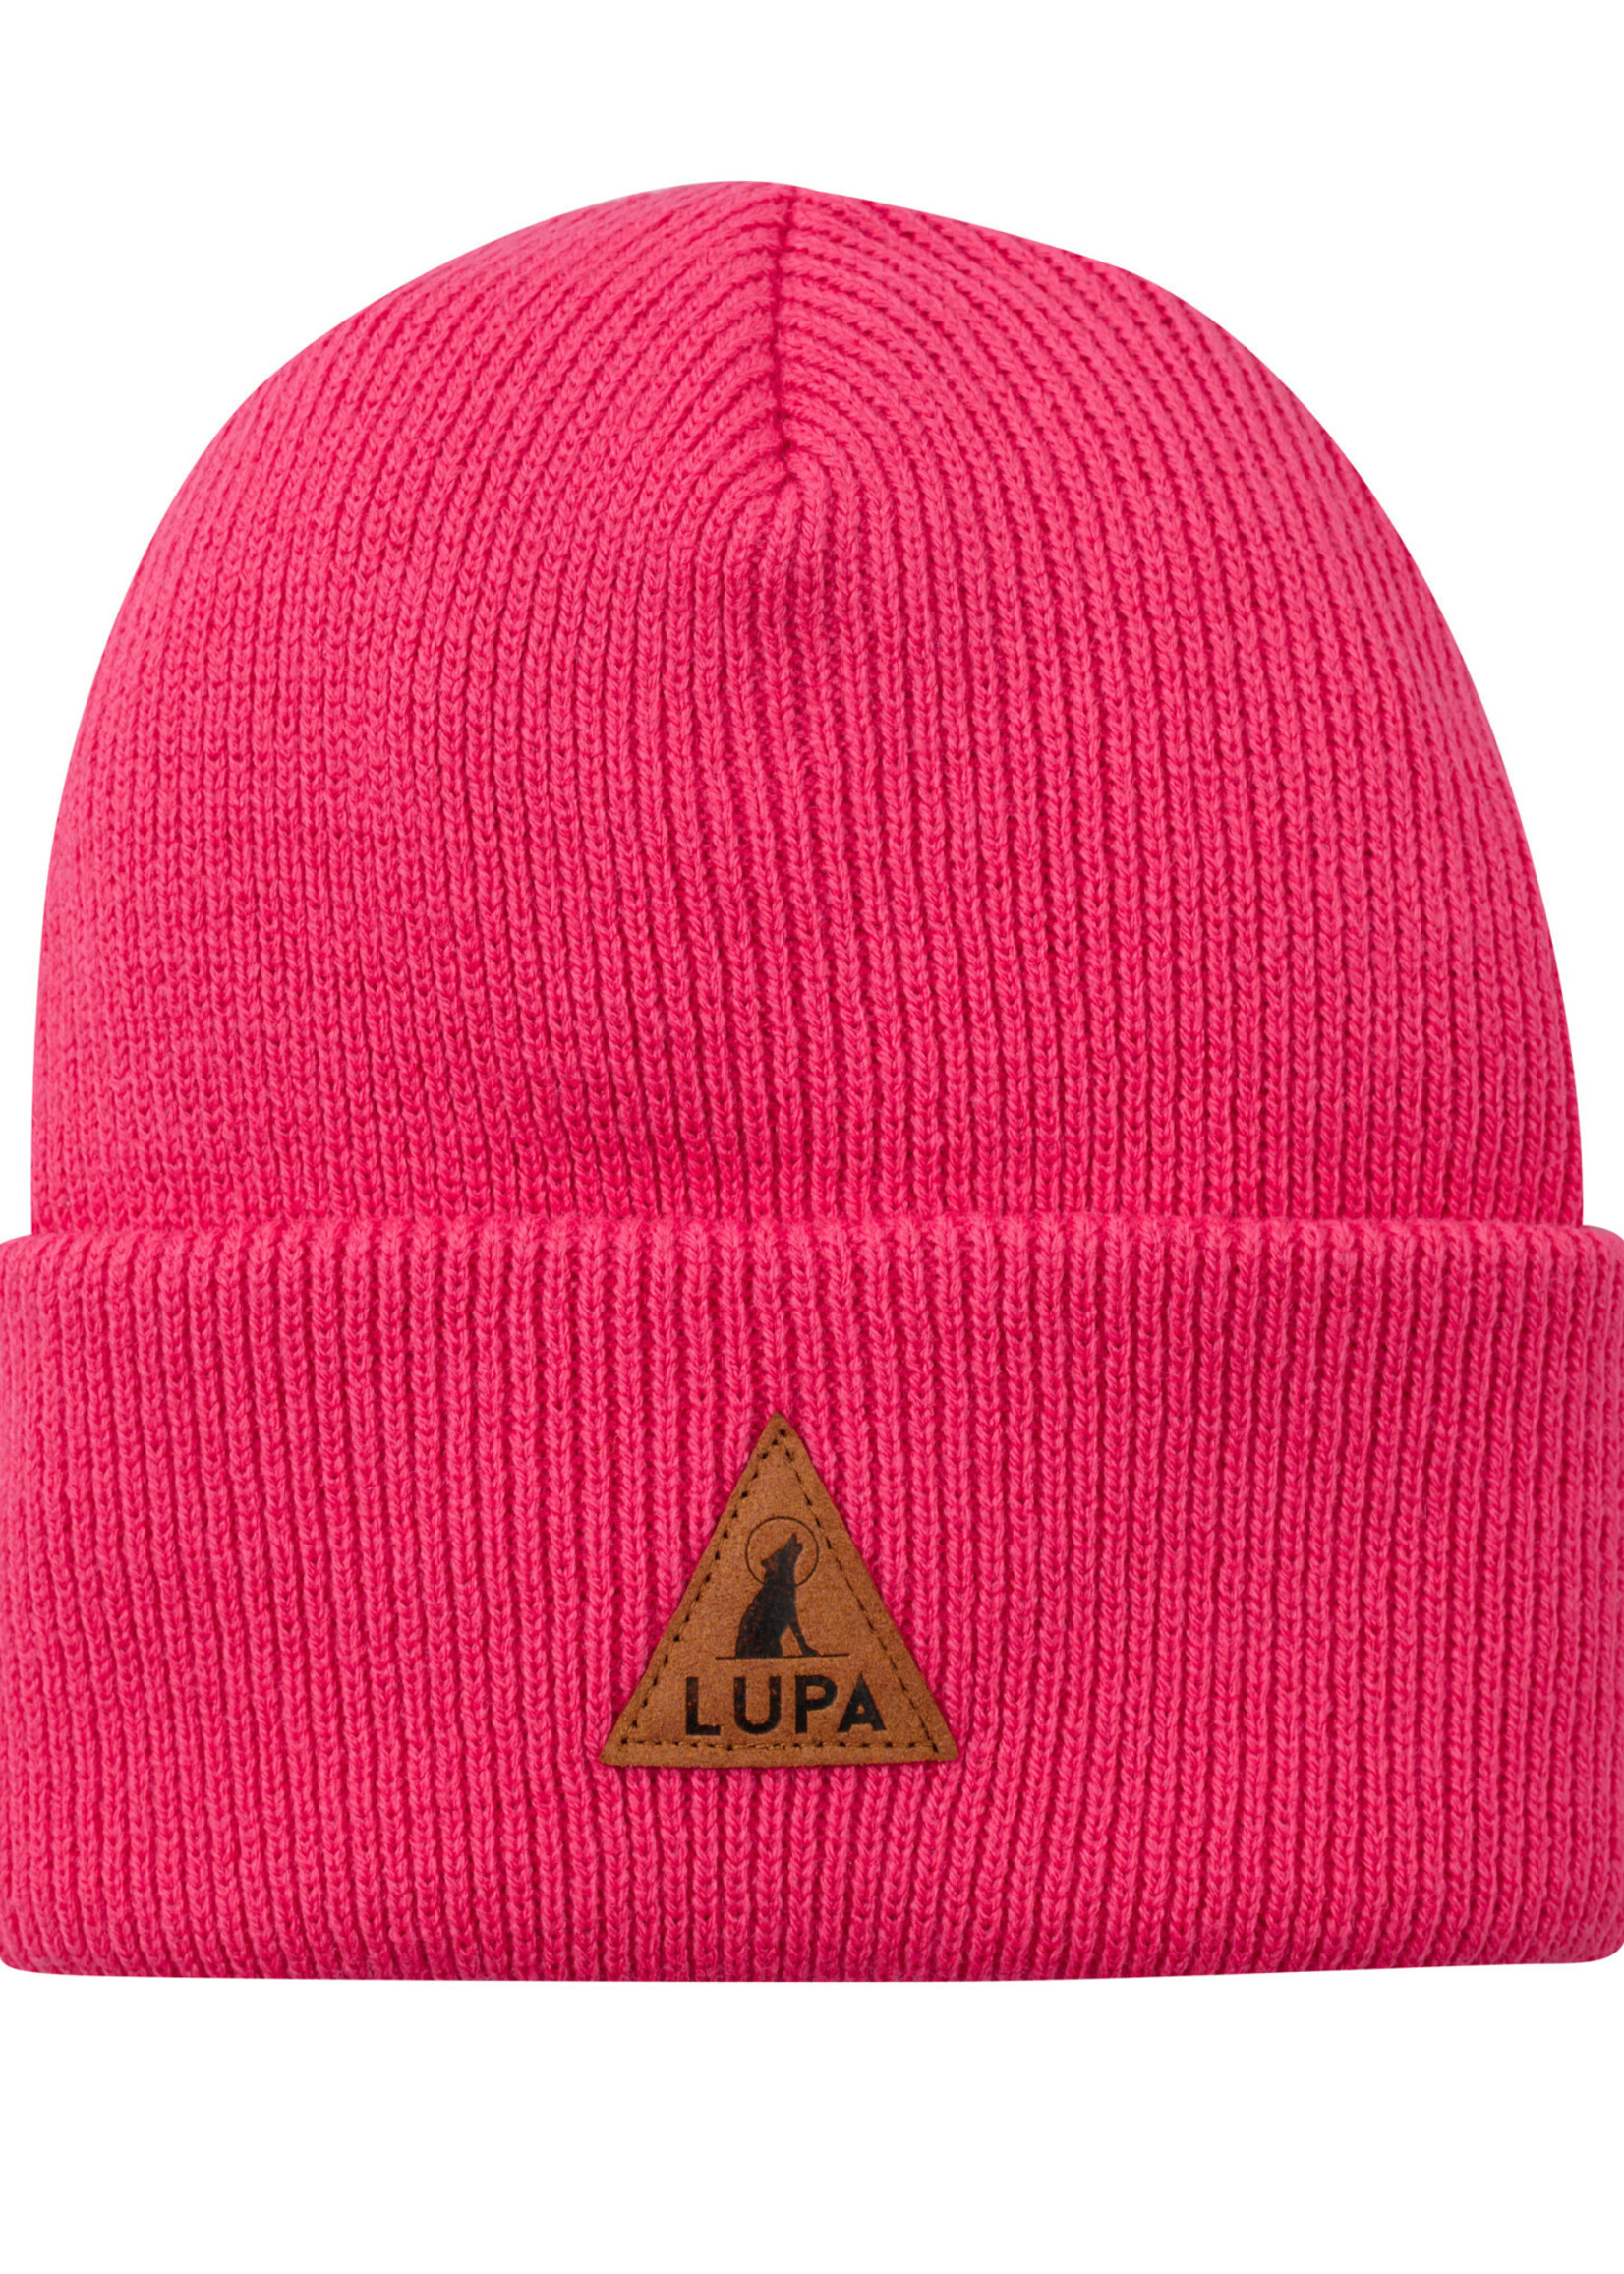 Lupa Canadian-made Retro Tuque Blush